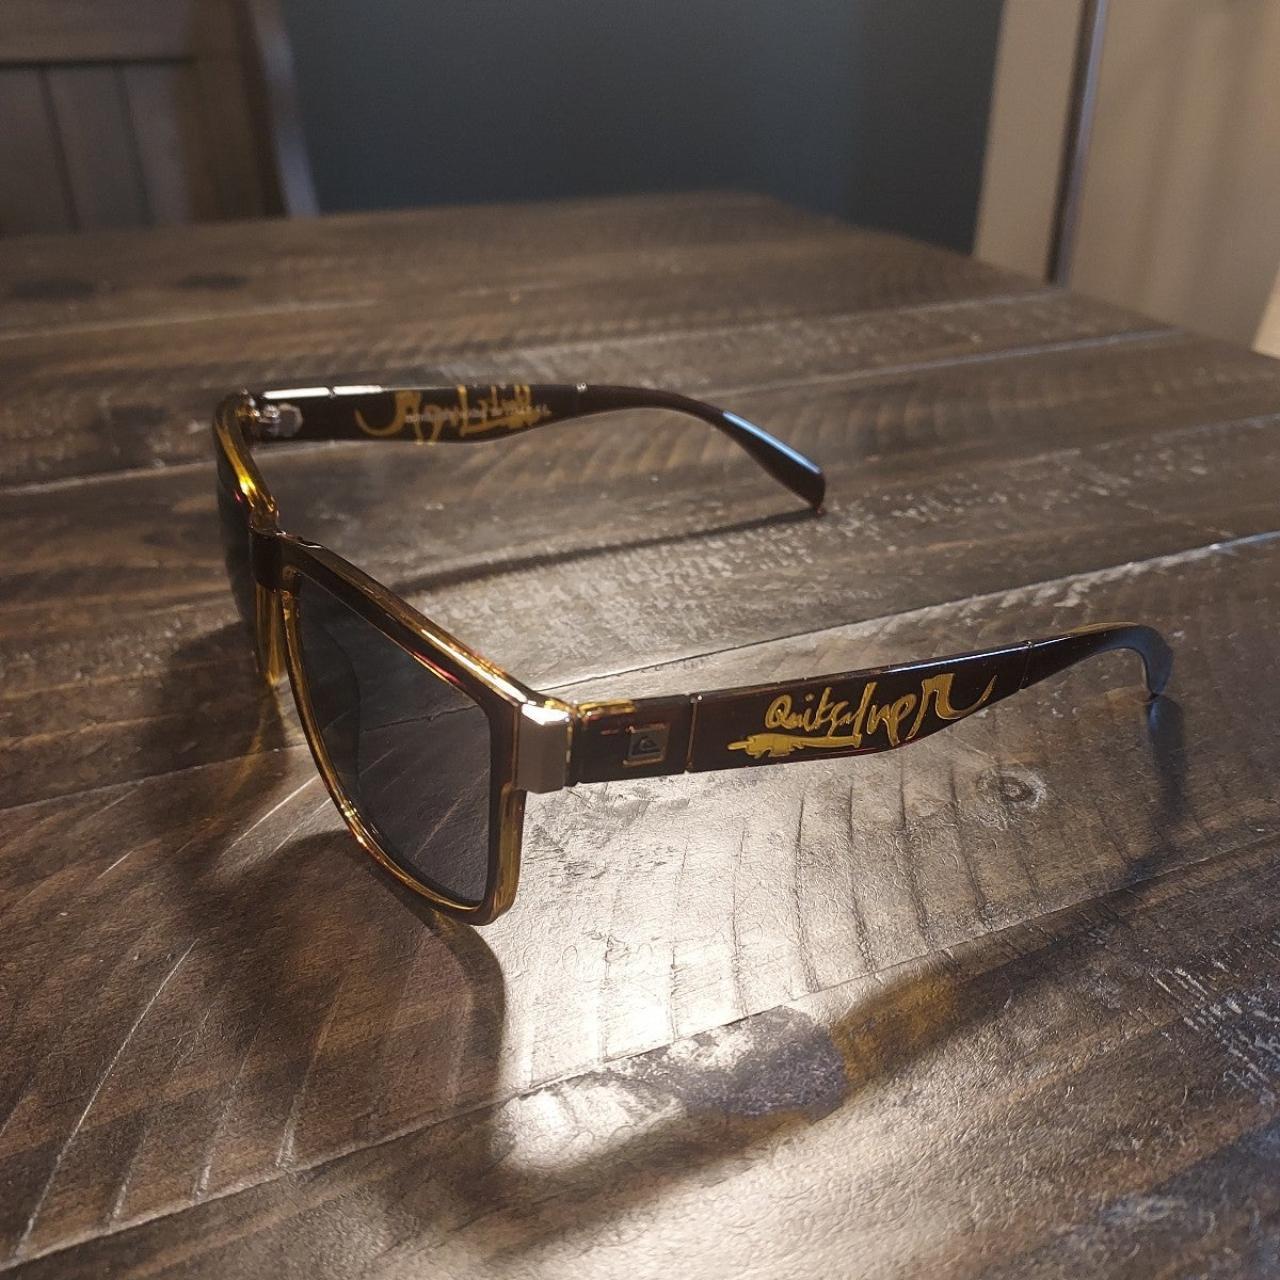 Quiksilver Men's Brown and Gold Sunglasses (3)